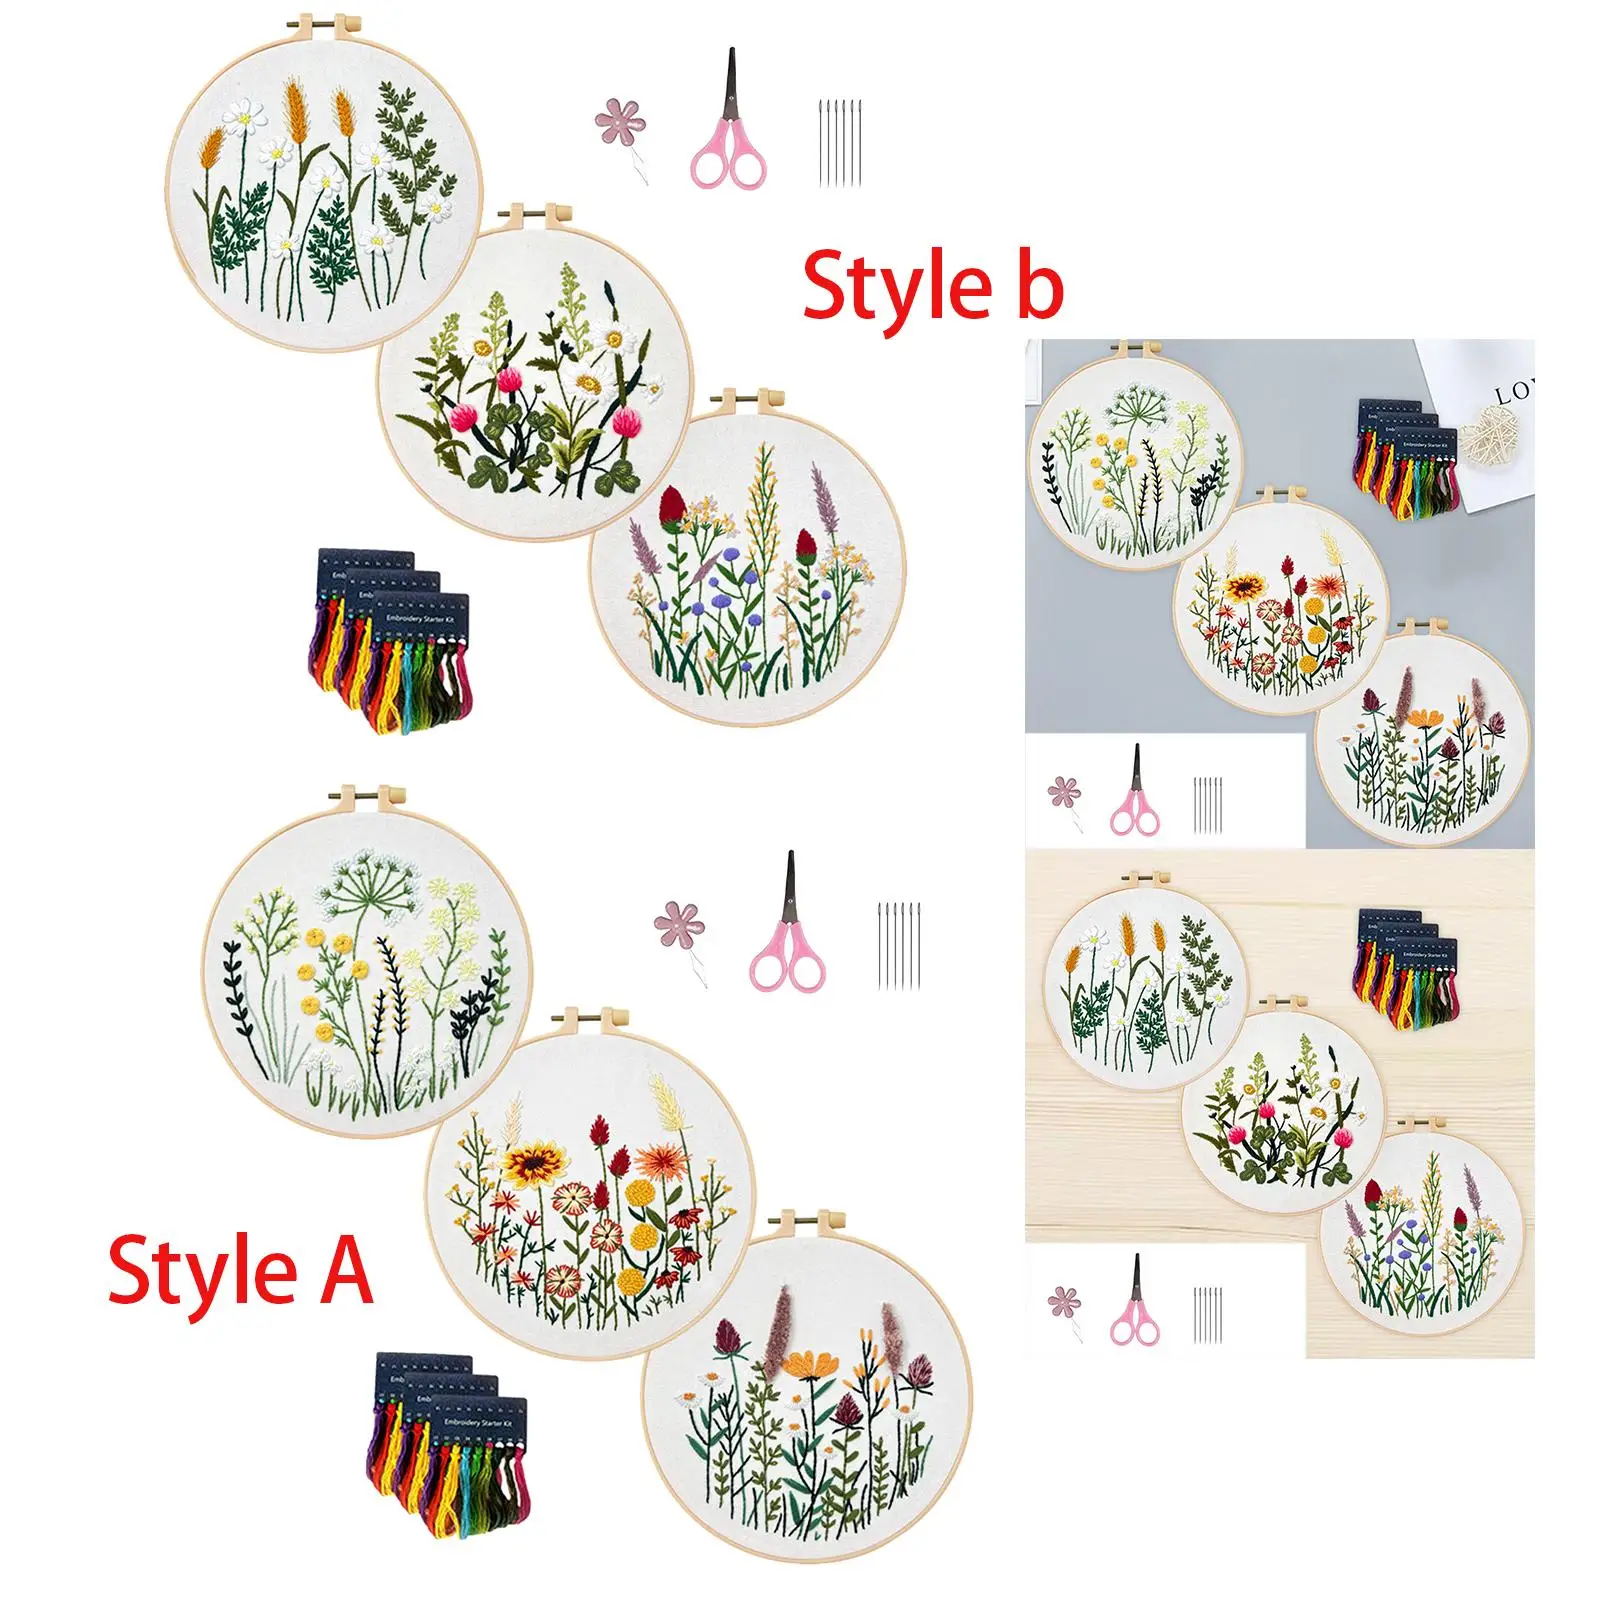 3Pcs Beginner Embroidery Set Home Decoration Needlework Embroidery Hoops Starter Tools for Handcraft Enthusiast Adults DIY Art